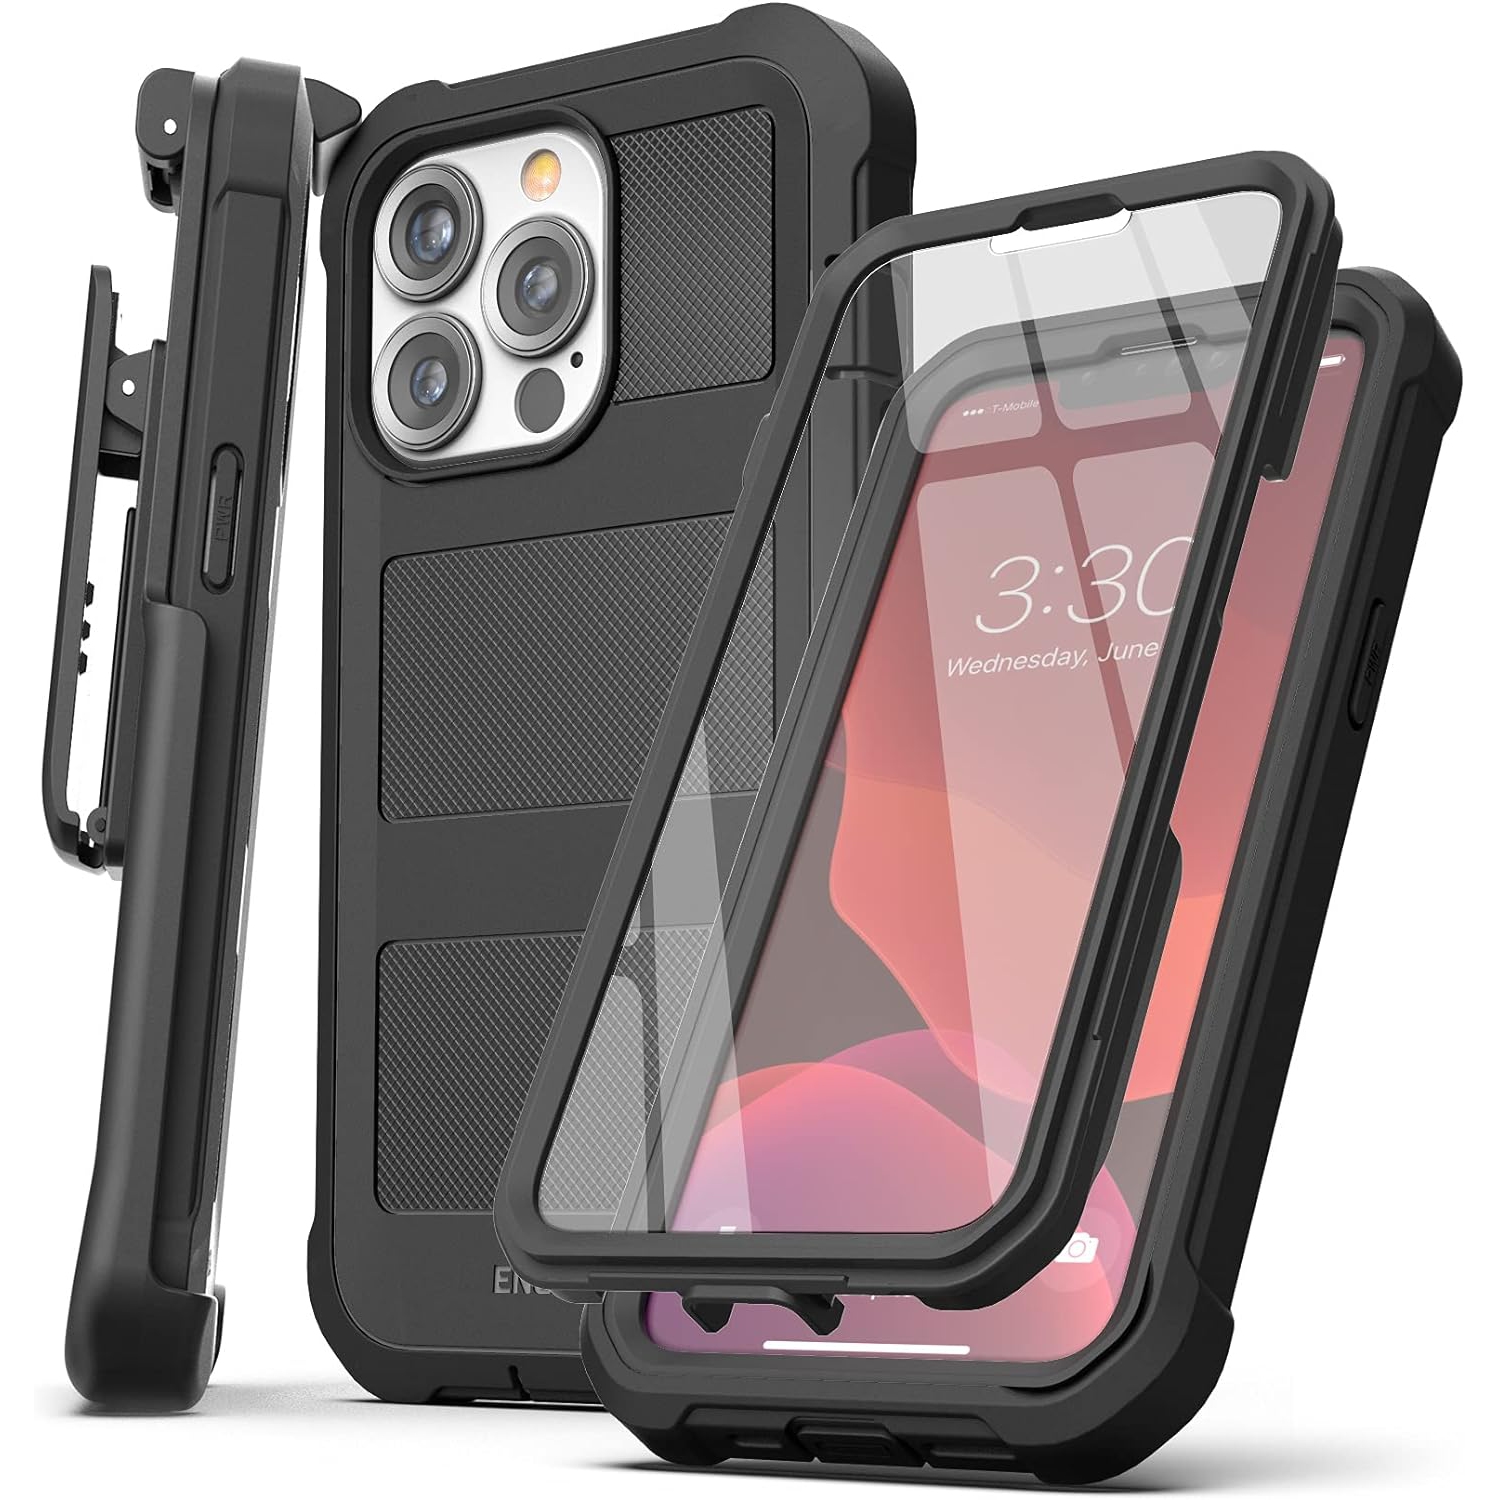 FalconShield Designed for iPhone 13 Pro Max Case with Screen Protector and Belt Clip Holster, Protective Full